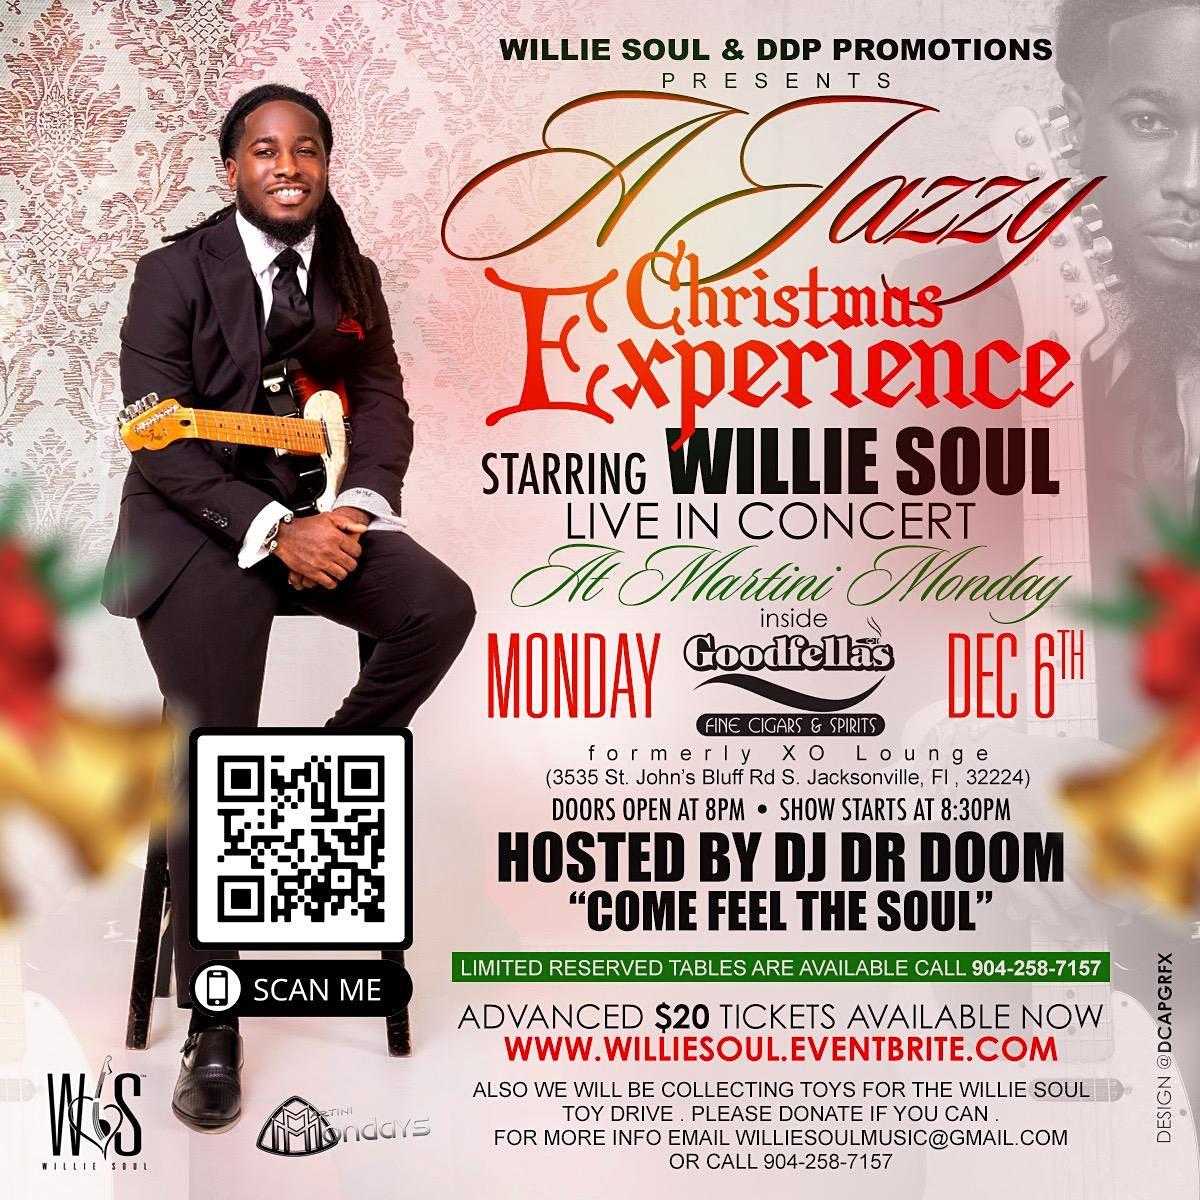 A Jazzy Christmas Experience Starring WILLIE SOUL Live in Concert